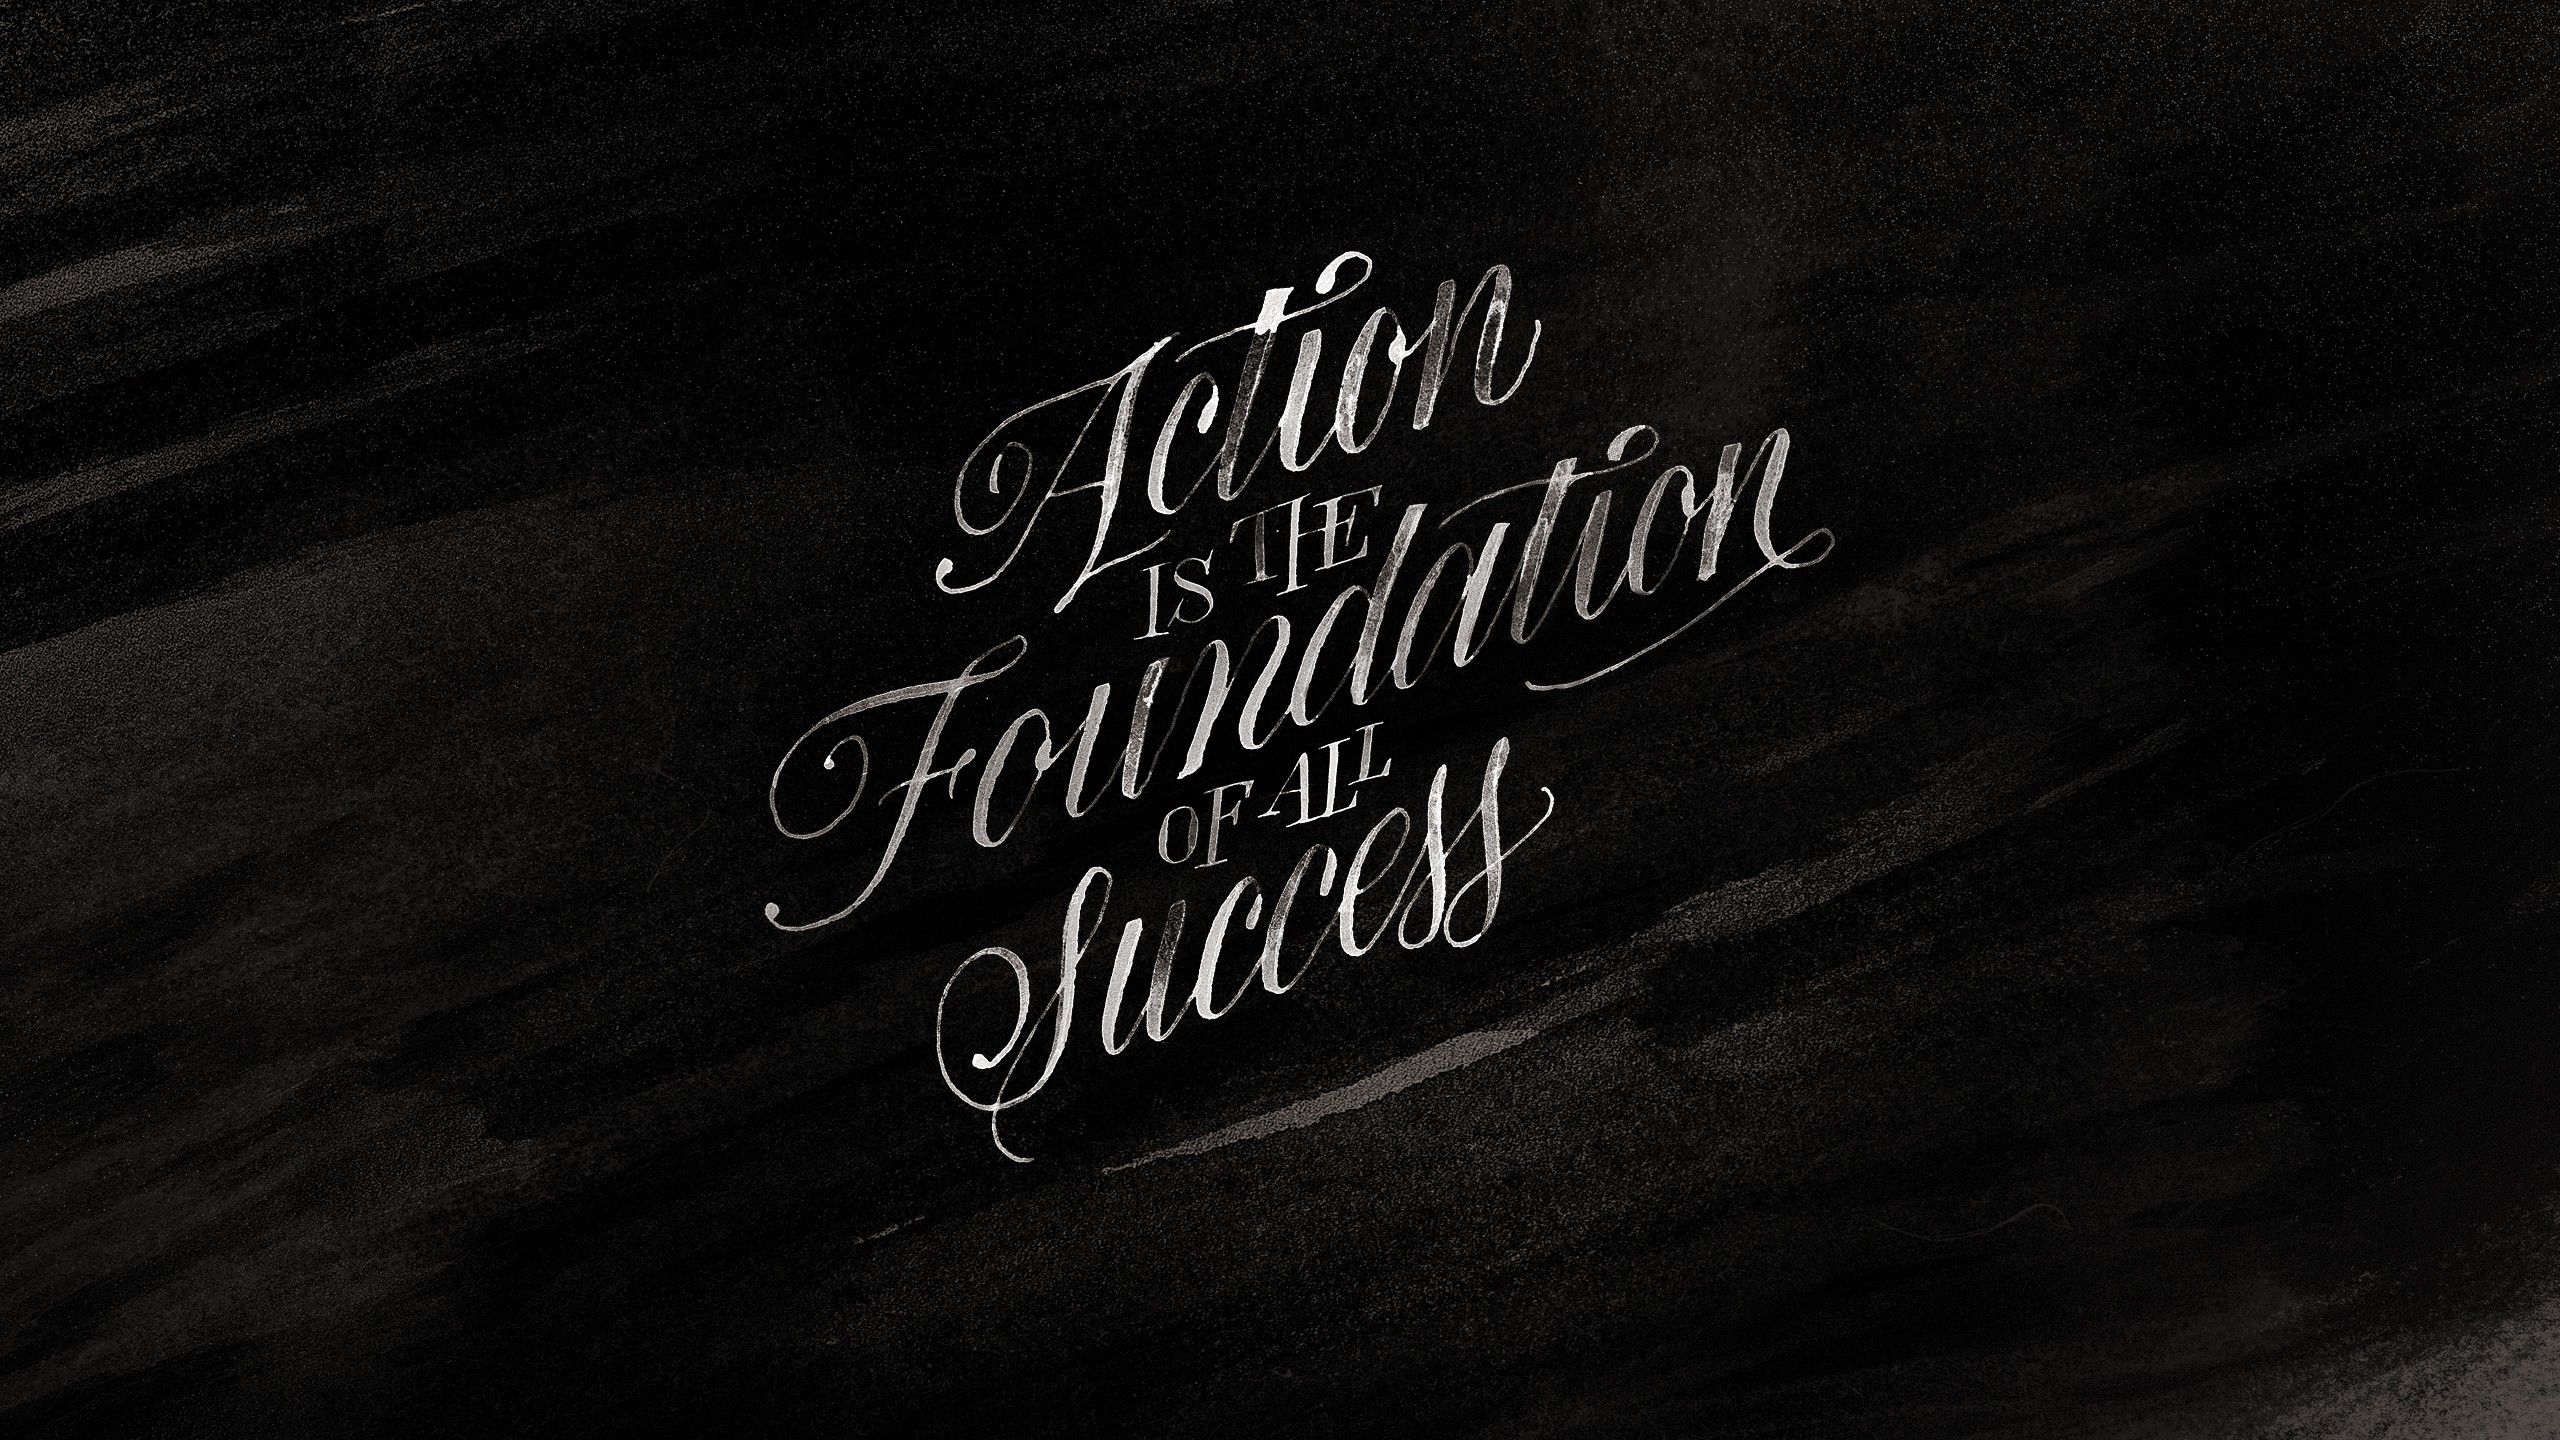 Calligraphy Success Quote Wallpaper Background 62878 2560x1440px